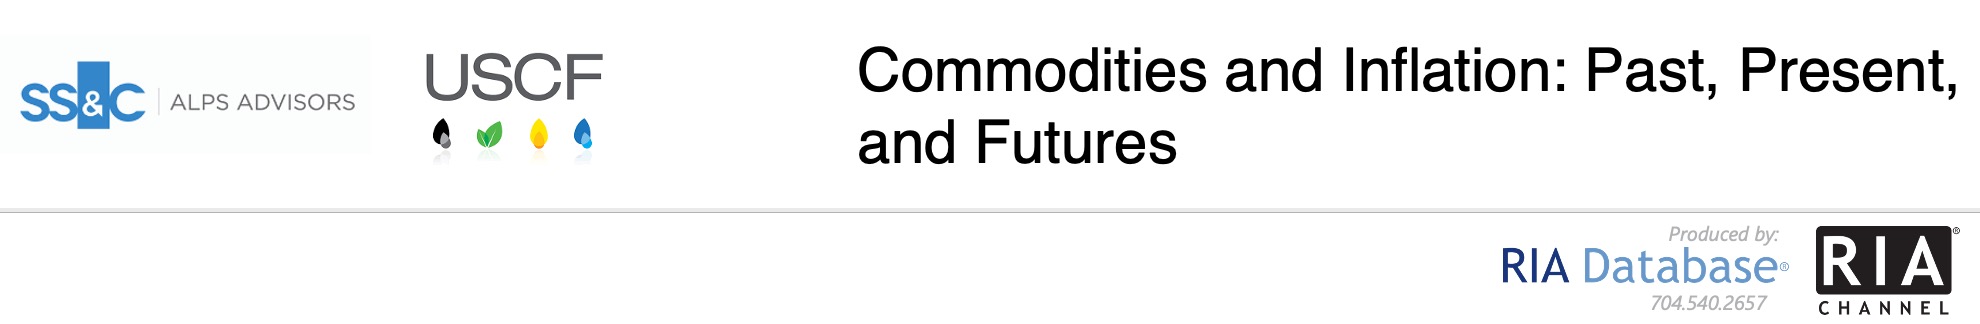 Commodities and Inflation: Past, Present, and Futures